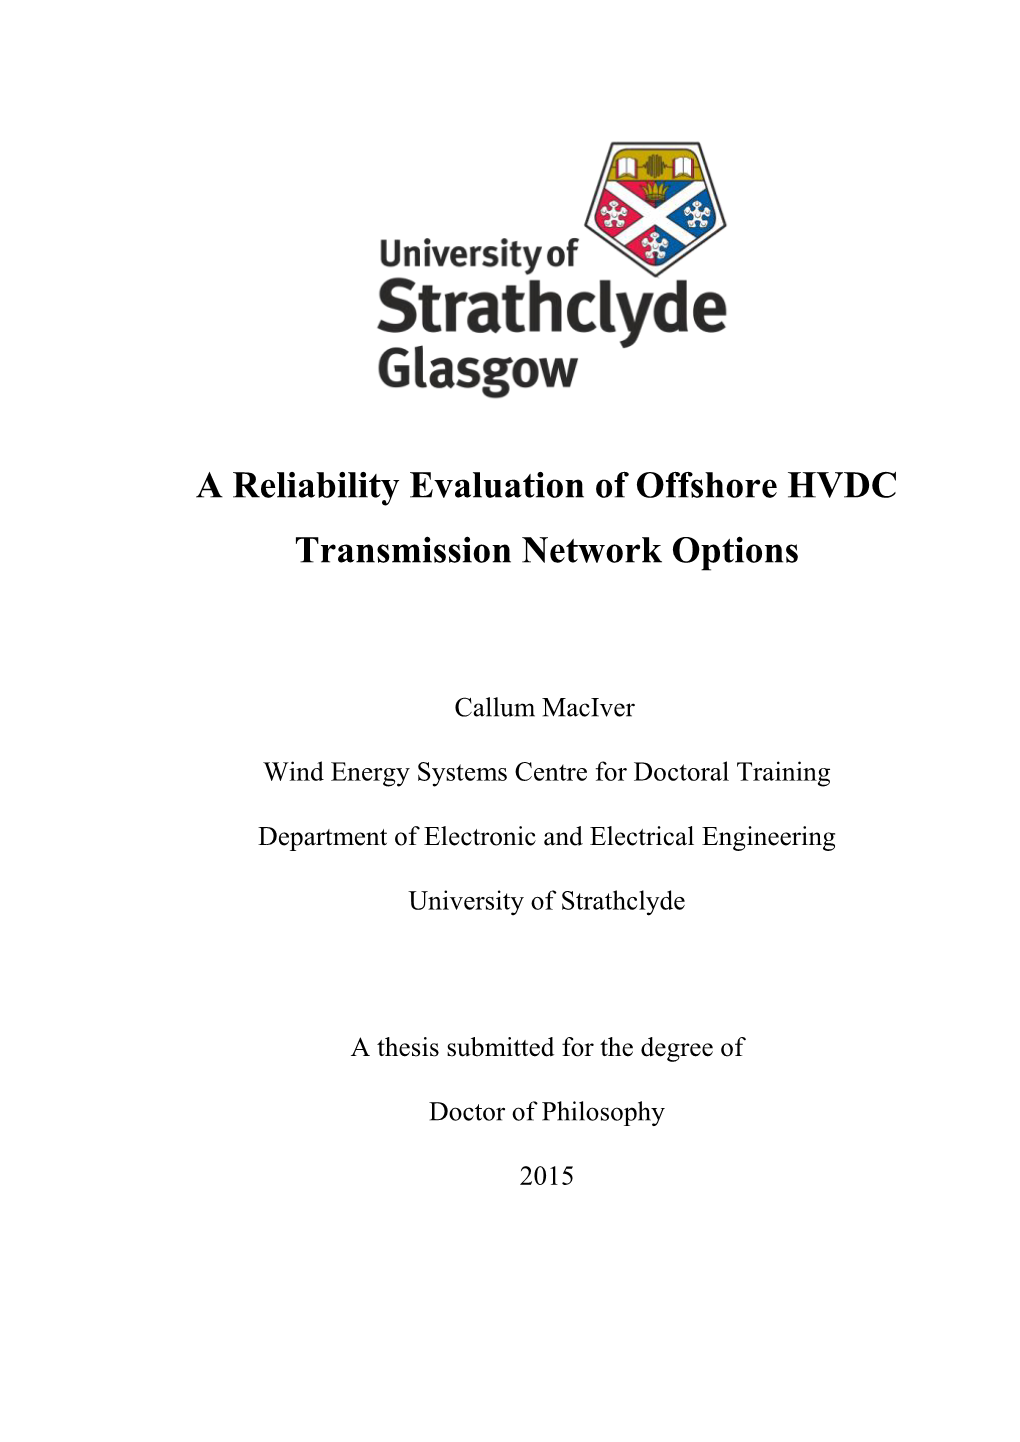 A Reliability Evaluation of Offshore HVDC Transmission Network Options